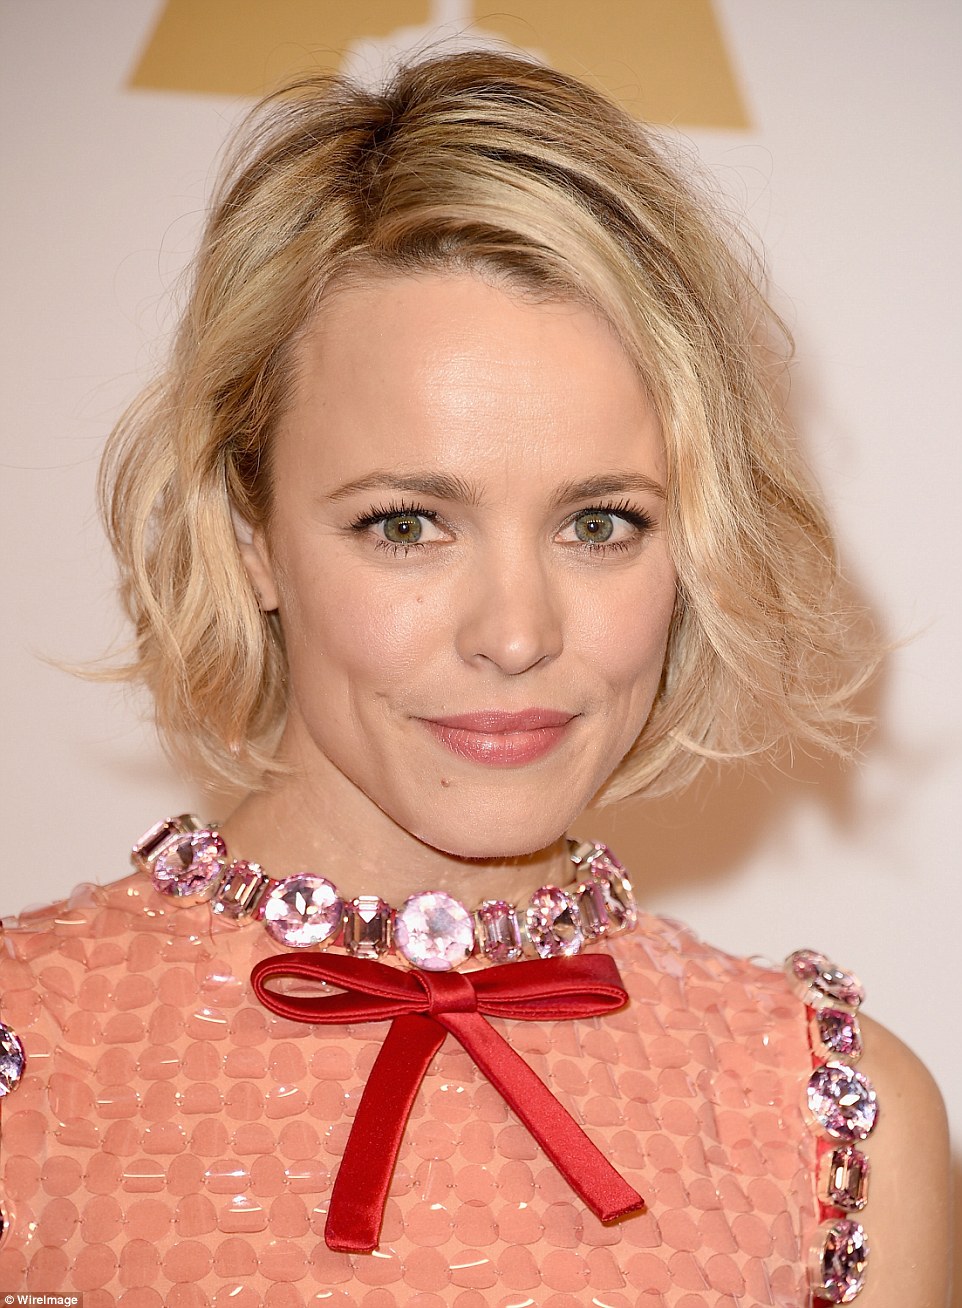 Glowing: Rachel McAdams looked like a winner already in her mini dress. The Notebook vet has been given a nomination in the Best Supporting Actress category for her turn in Spotlight